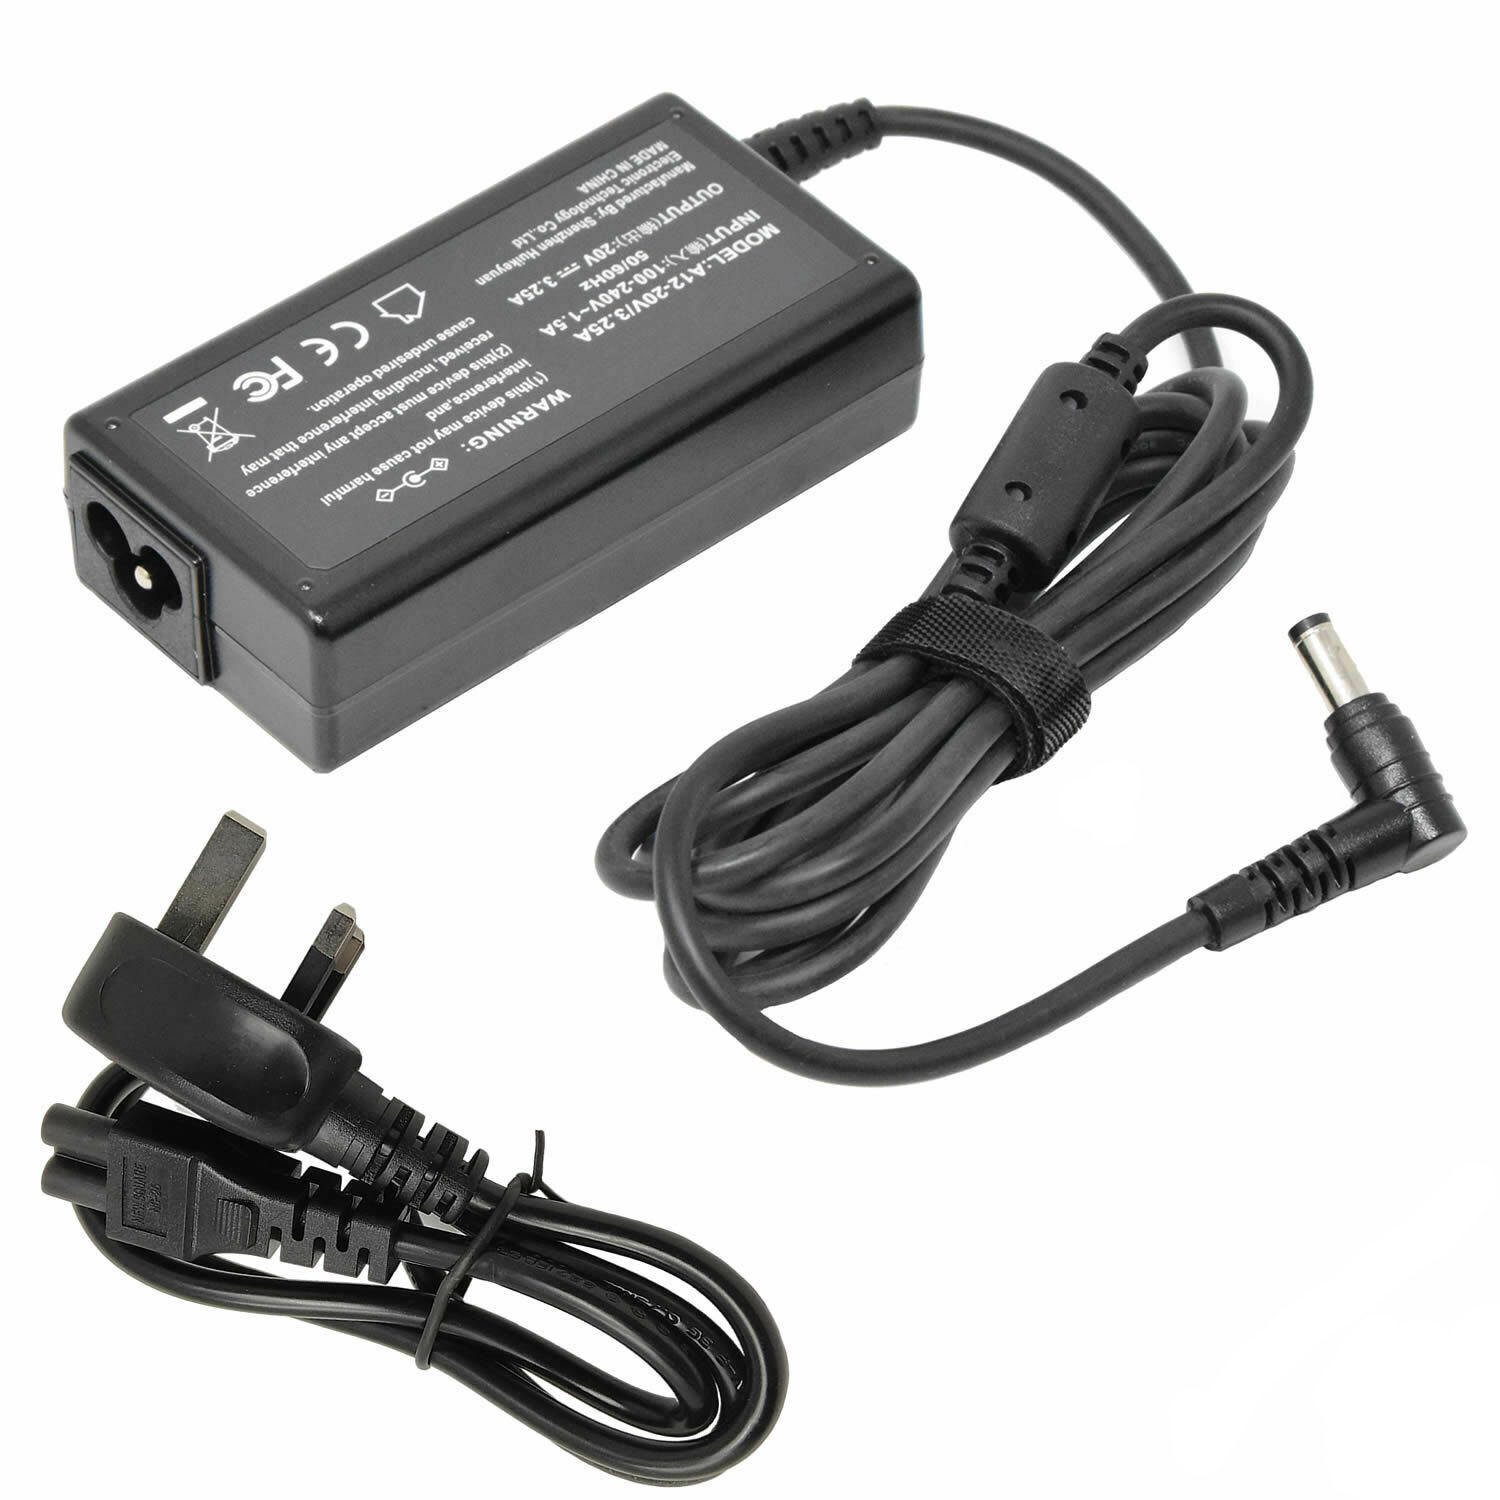 Lenovo G460 Power Adapter Laptop Charger